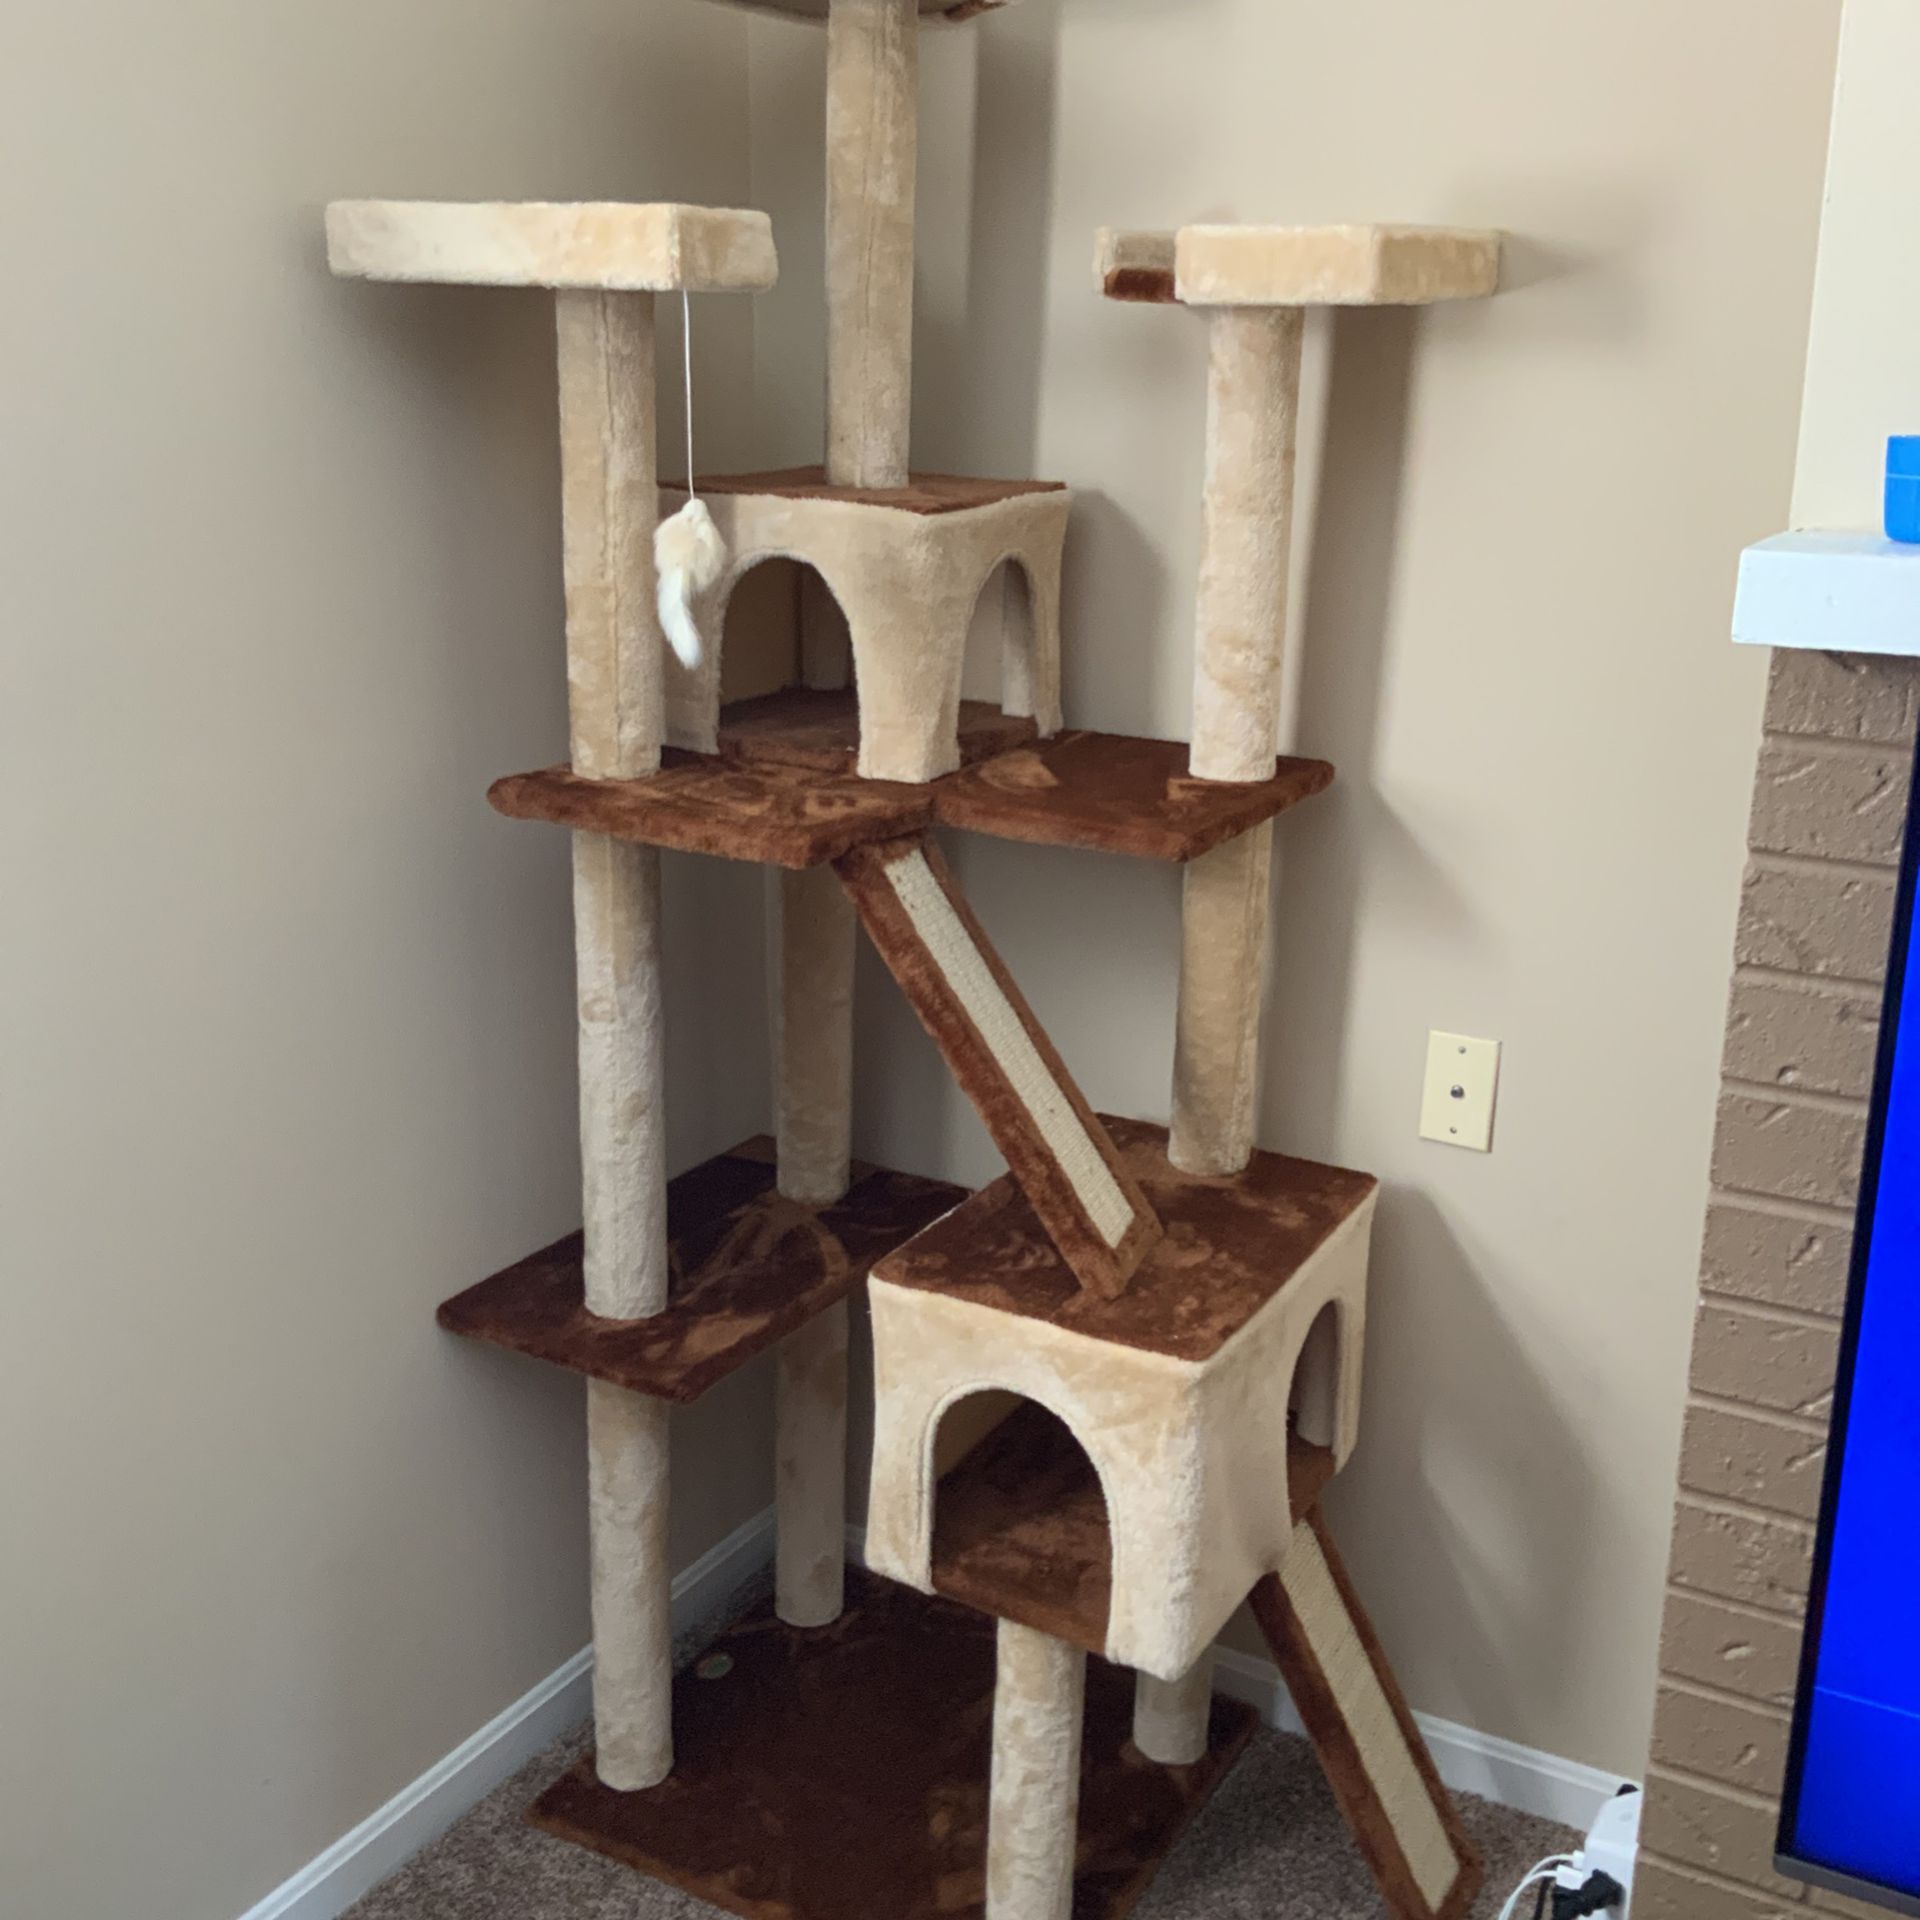 Cat Tree Super Fun For Cats Can Make As Their Home Has Many Activities To It Very Big. 